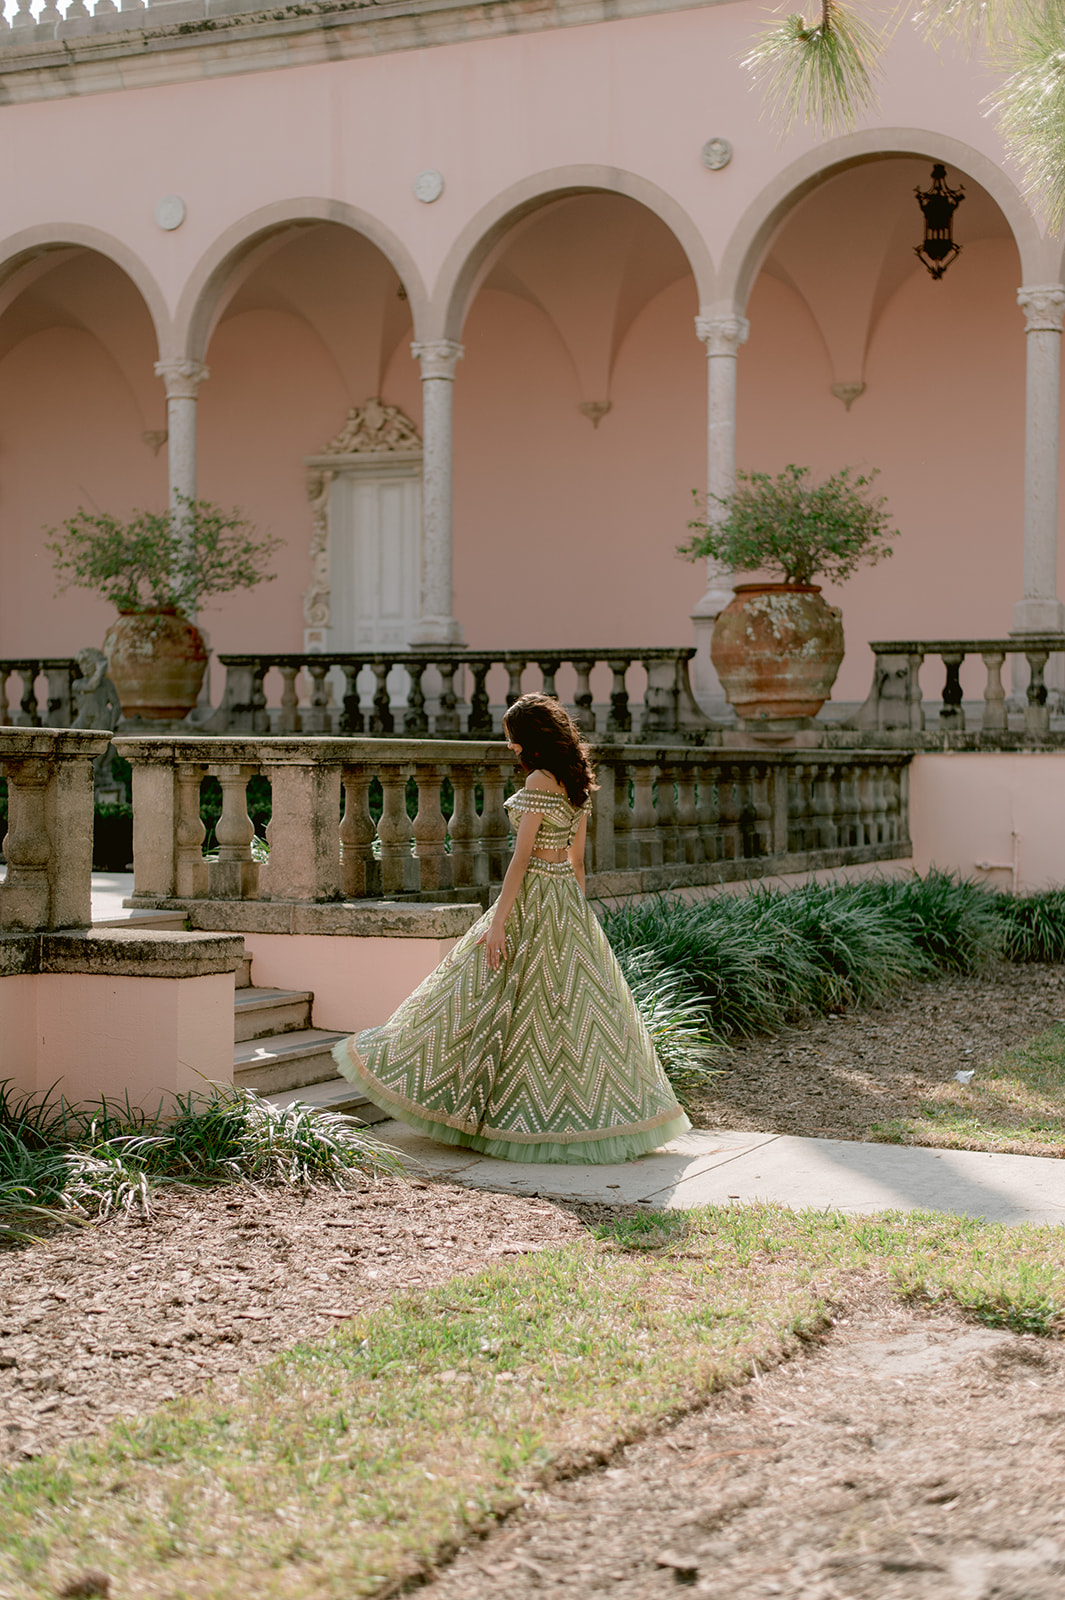 "Stunning portrait of Indian bride and groom at the Ringling Museum's Ca' d'Zan mansion"
